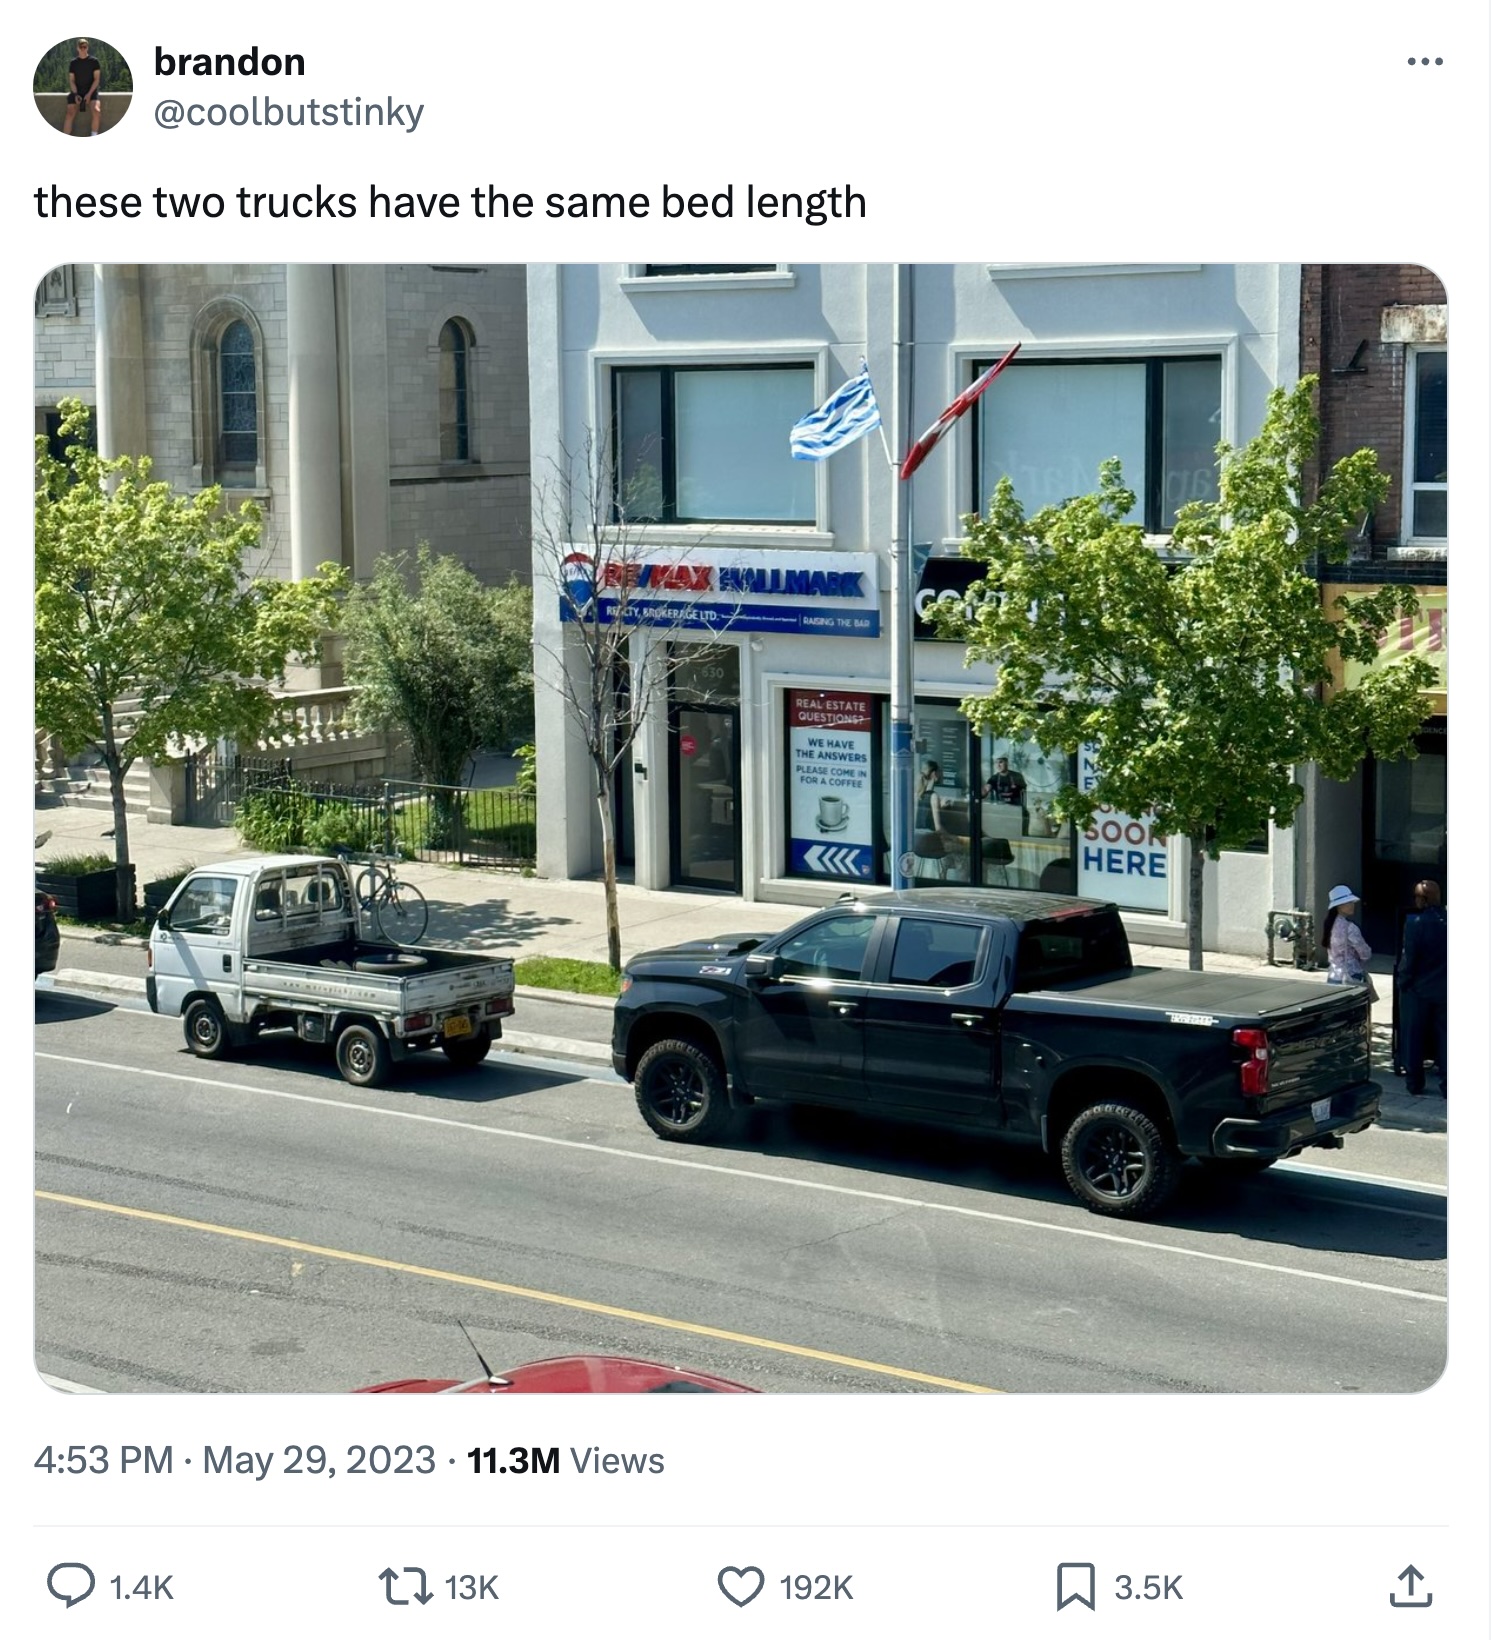 These two trucks have the same bed length.